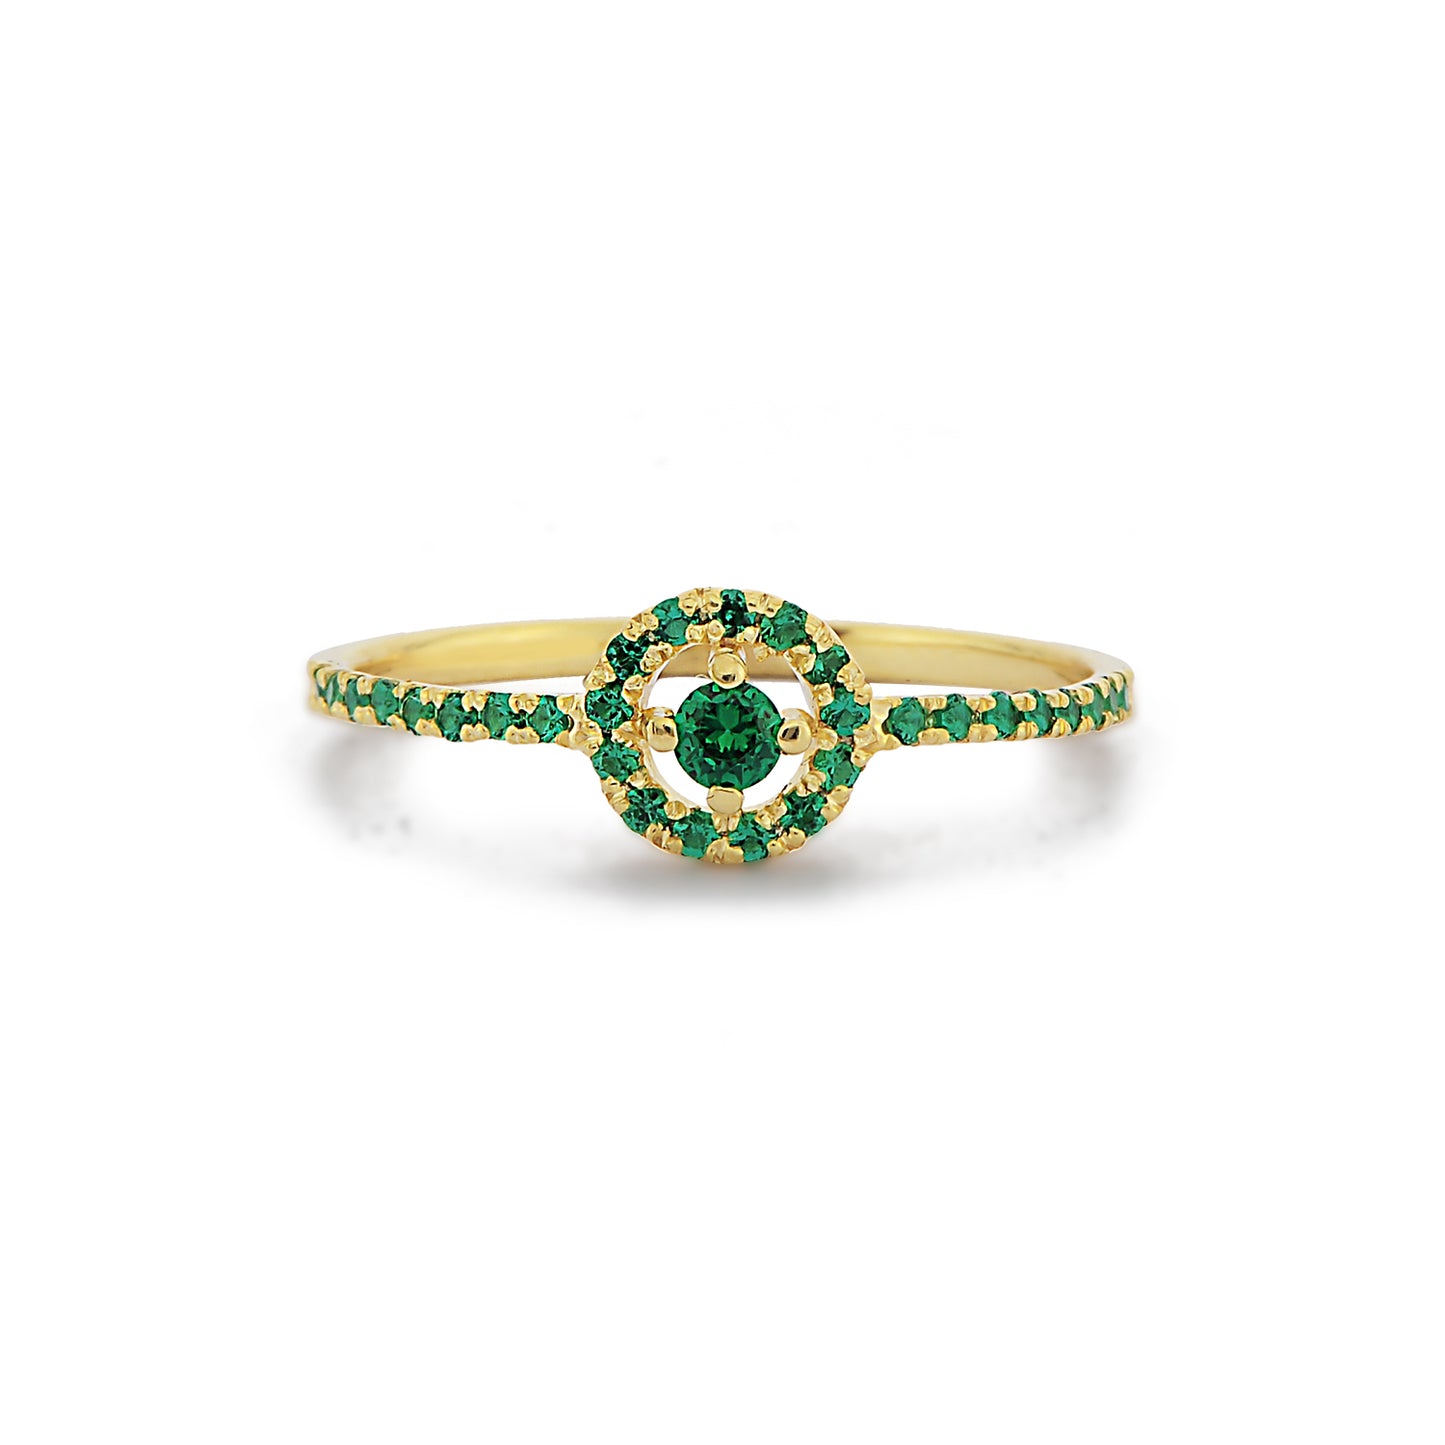 Cluster Emerald Gold Ring / Emerald Band Ring / Emerald Minimalist Solitaire Ring / Handmade 14k 18k Solid Gold Stackable Ring